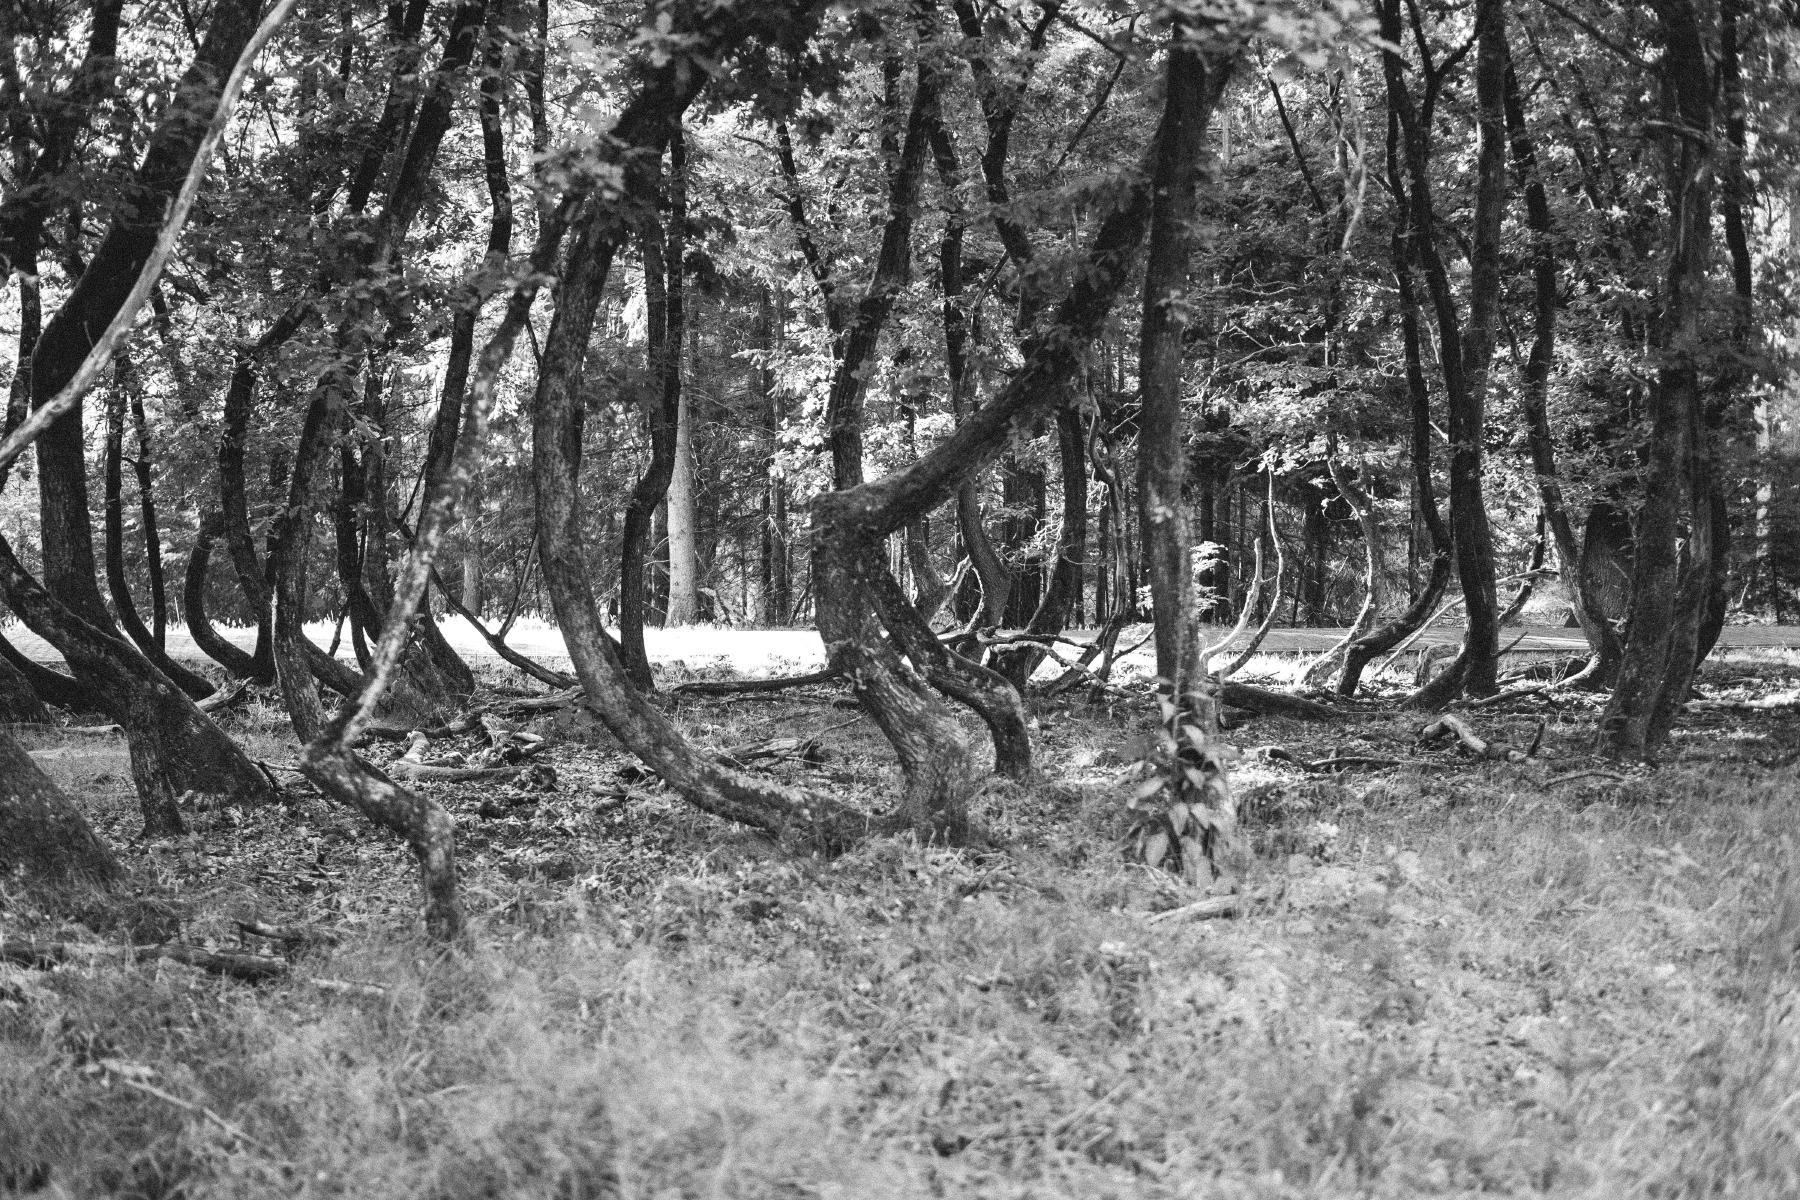 a black and white photograph of the trunks of a grove of skinny oak trees. on the left side of the image they have  curve to the left, and on the right, they curve to the right. above 4 feet, they grow as normal trees.